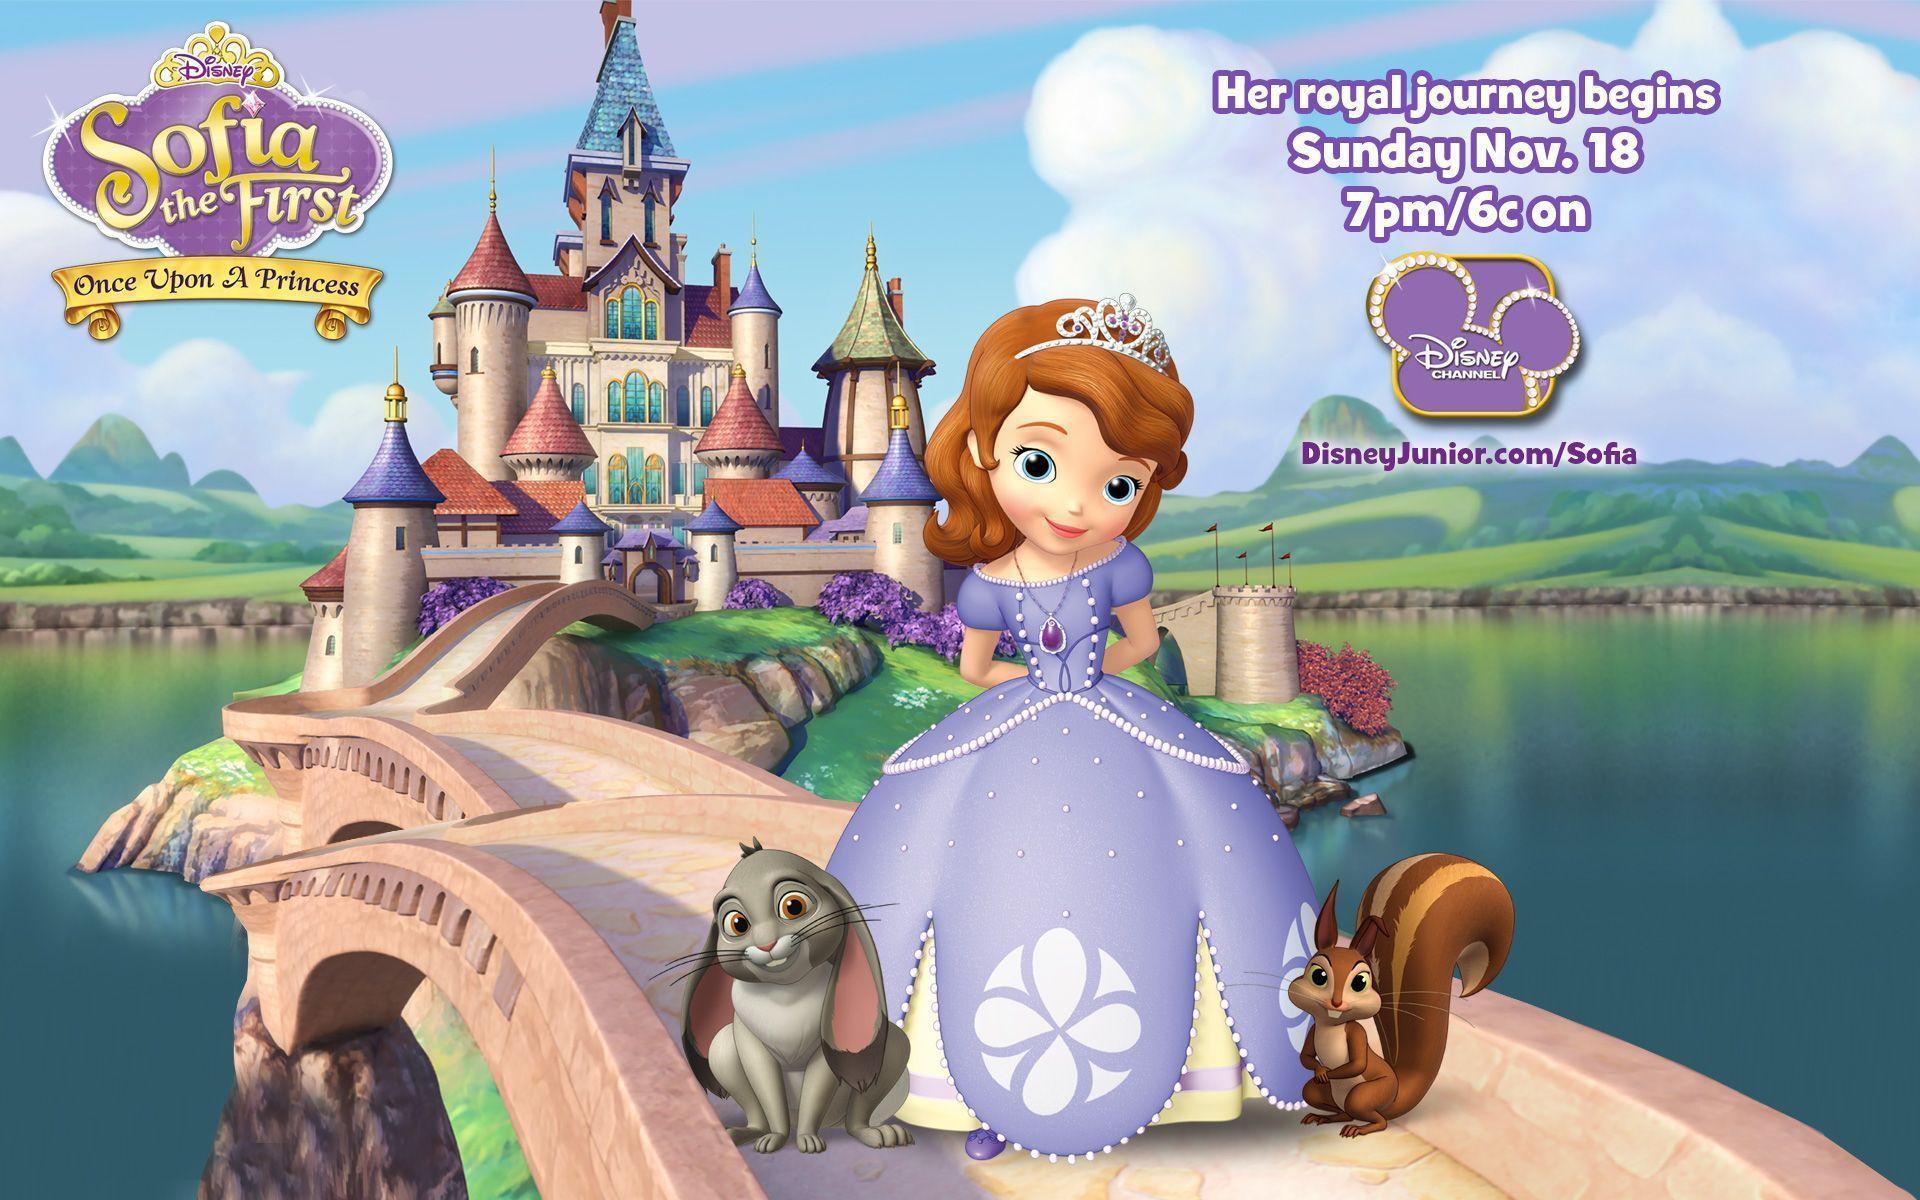 Sofia the First&to Premiere November 18 on Disney Channel